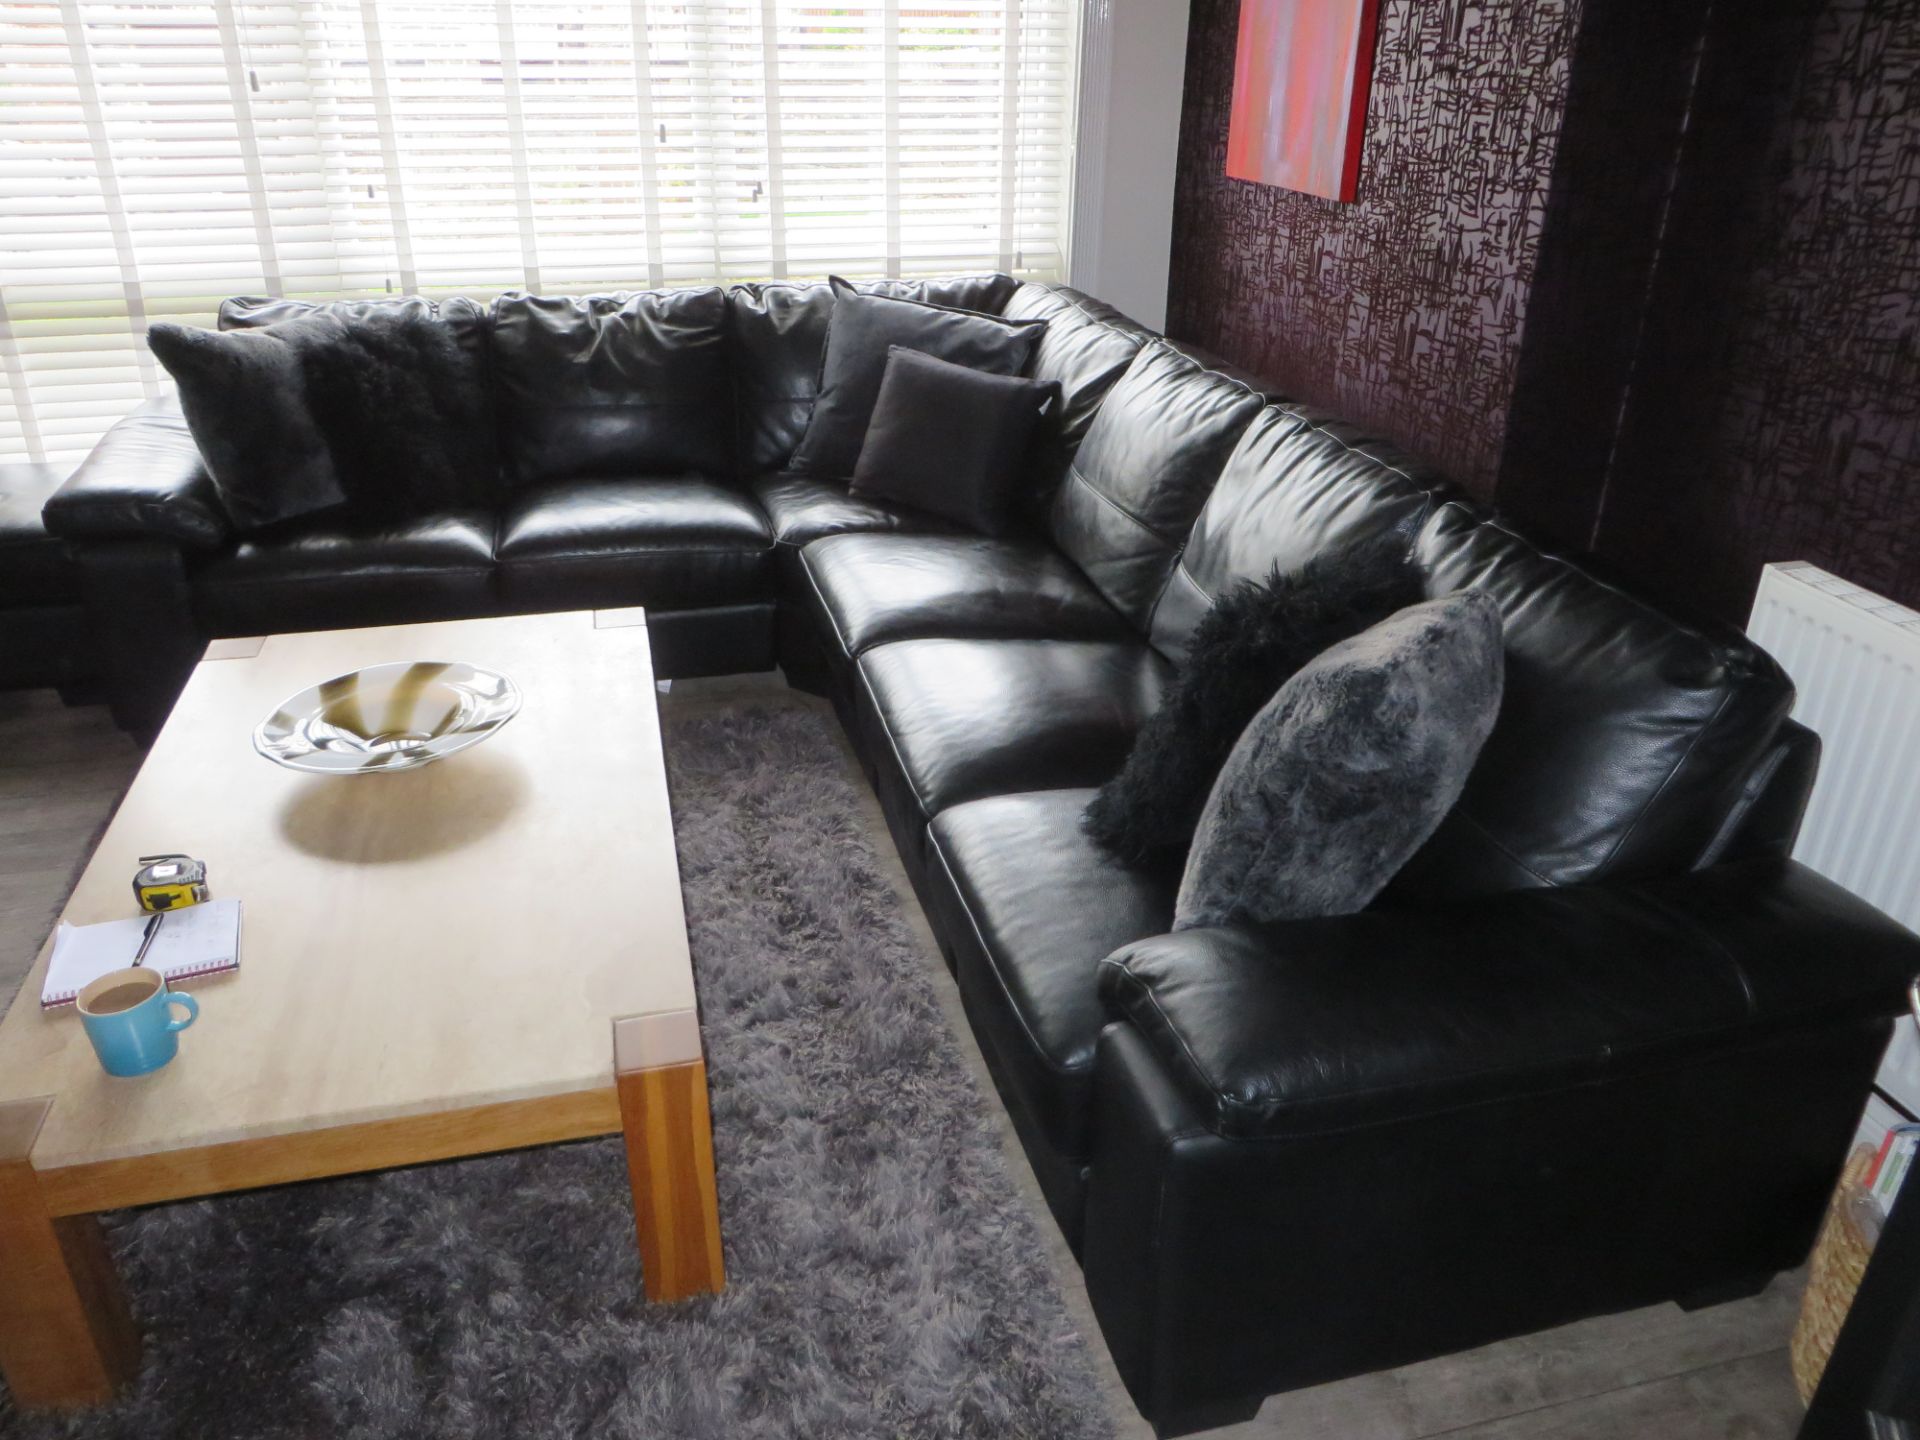 1 x Large Black Leather DFS Corner Sofa with 1 x Pouffe- Excellent Condition - Over £4000 new